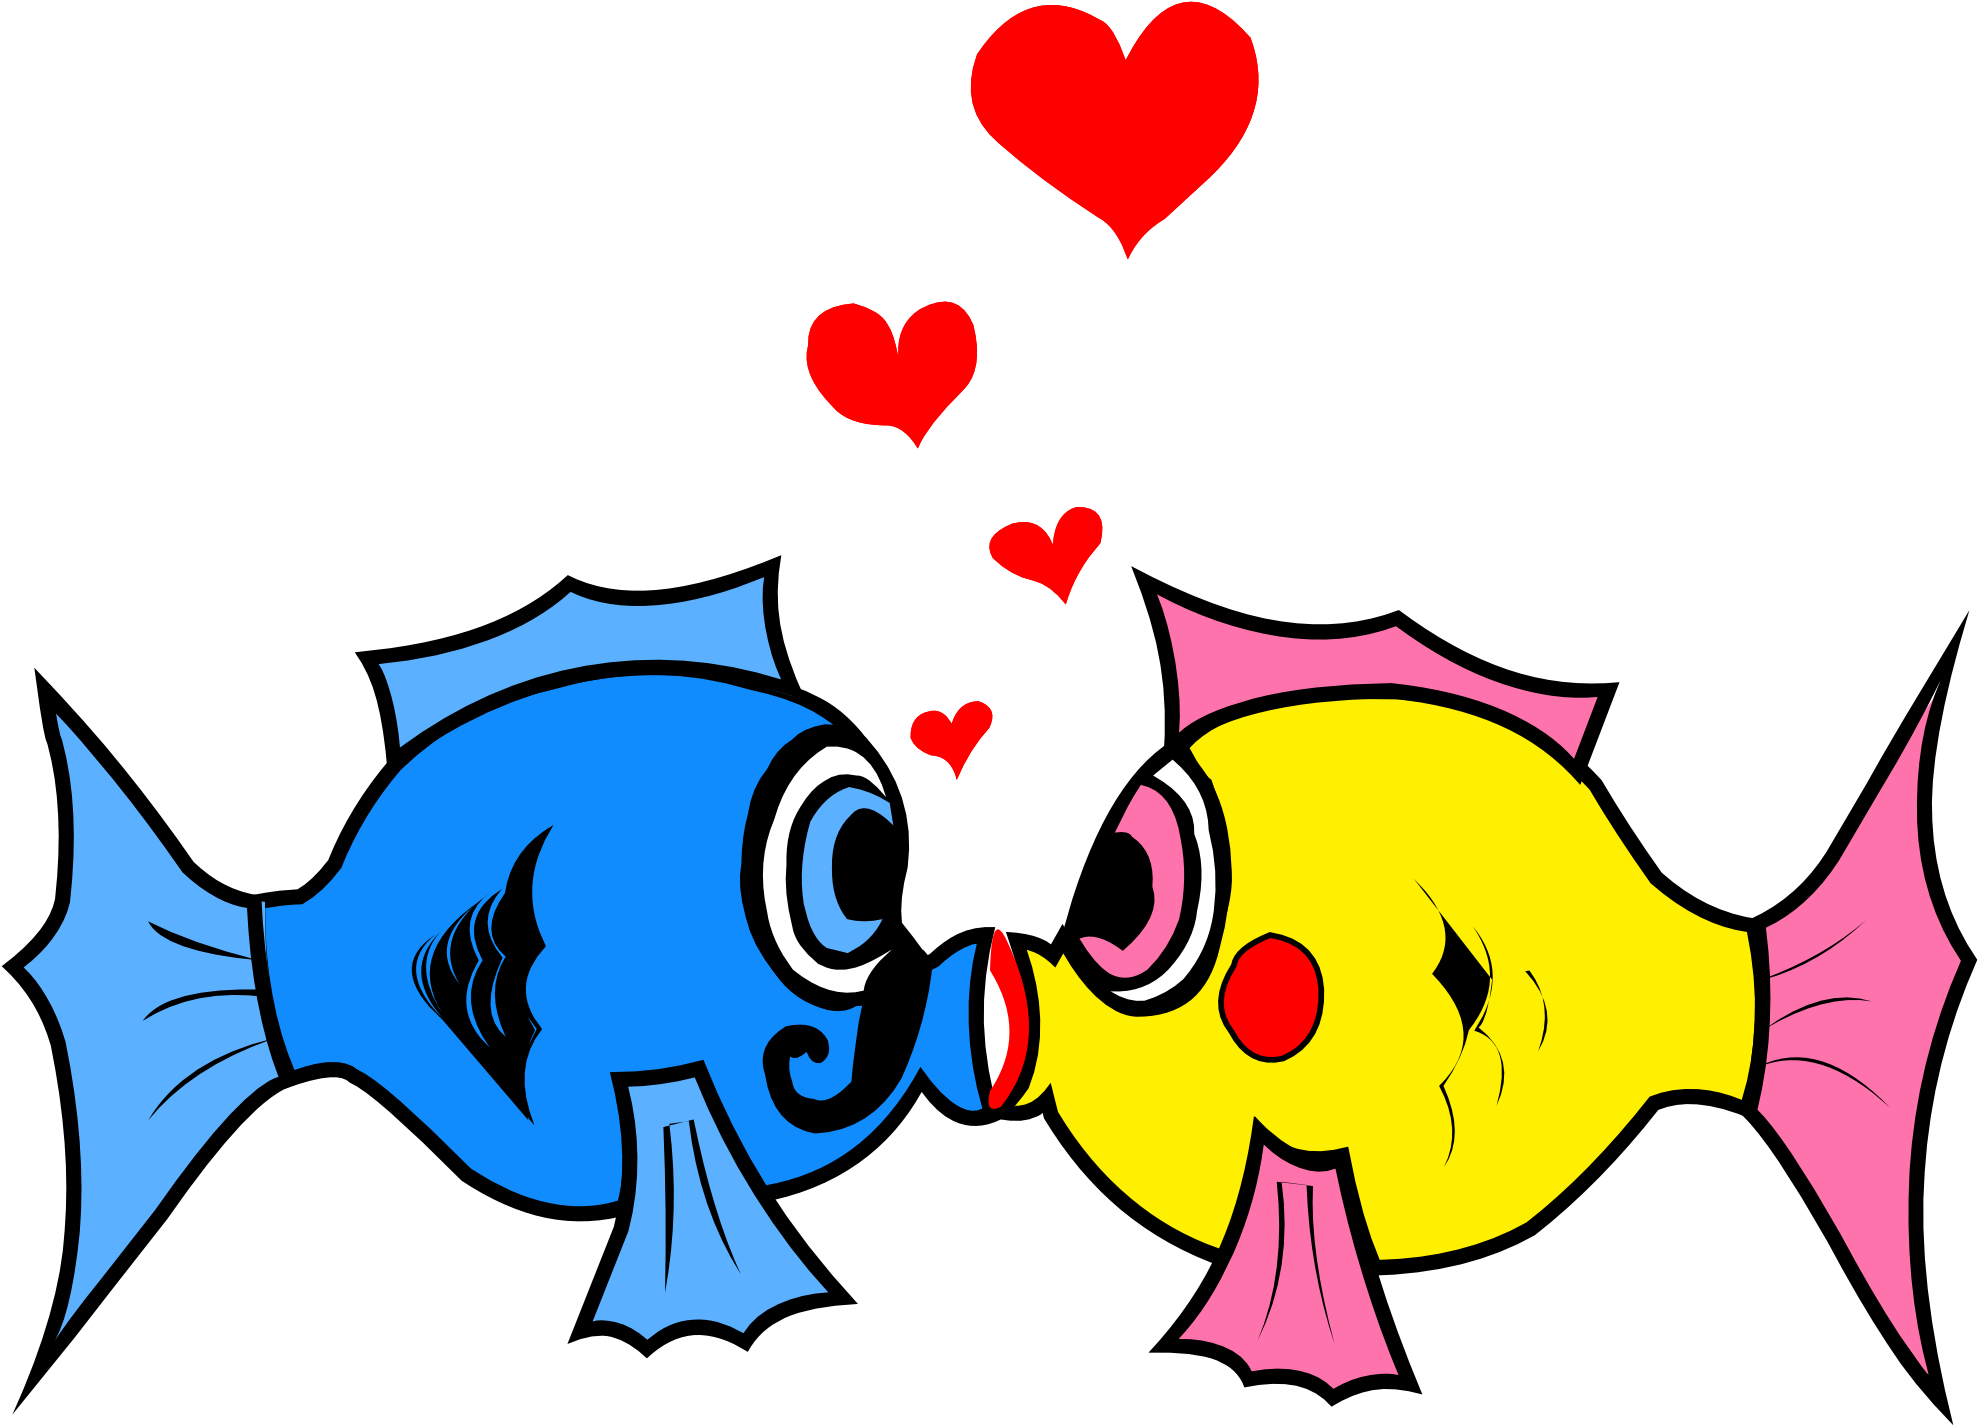 Love clipart images clipart i